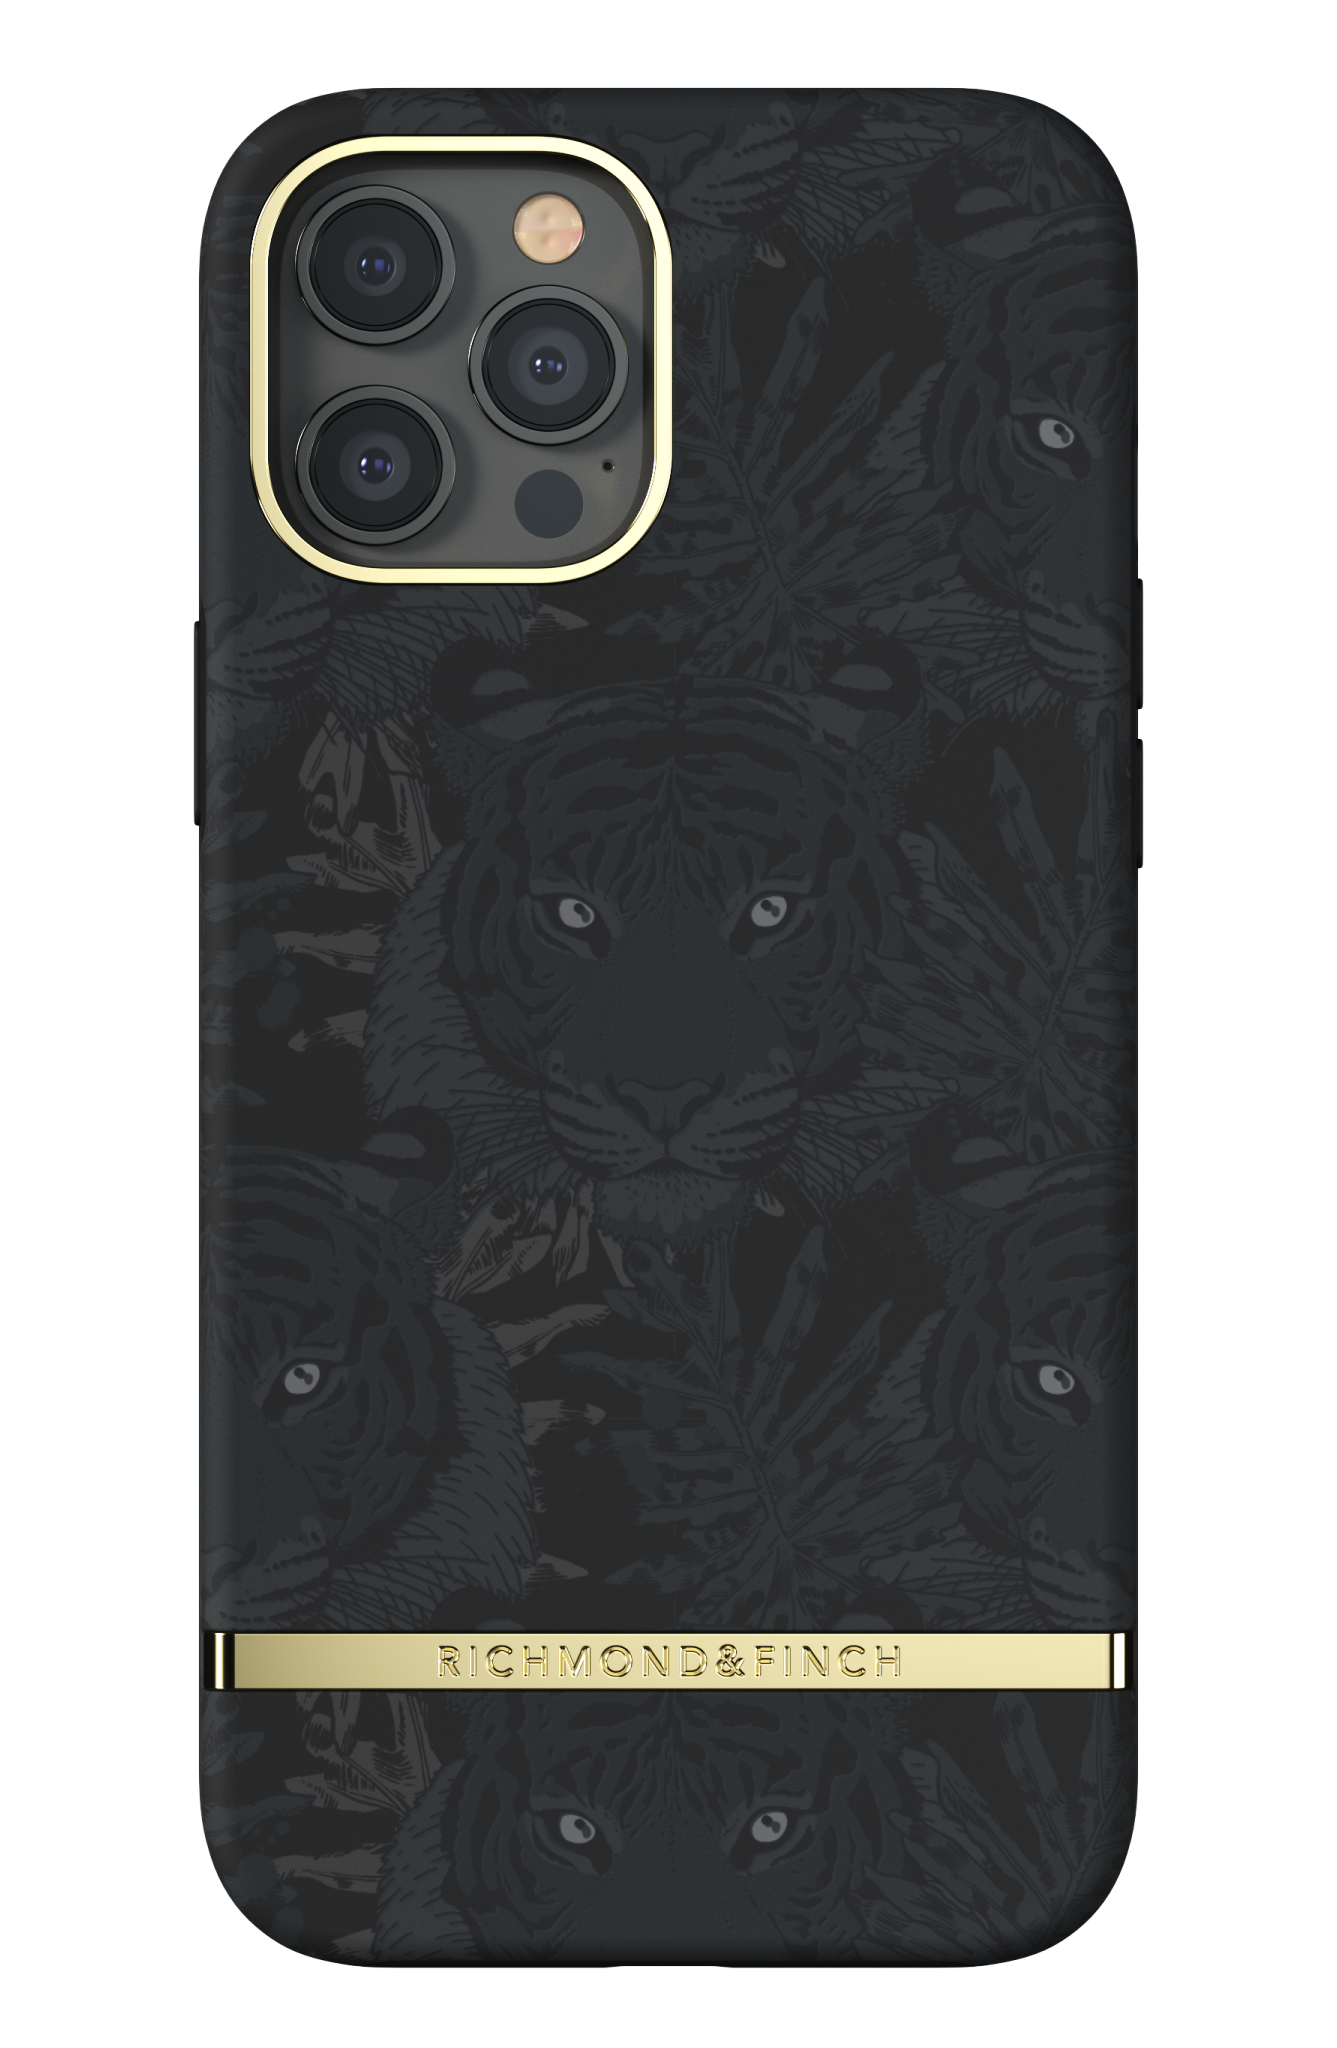 12 BLACK Backcover, MAX, 12 PRO & APPLE, Tiger Pro Max, Black RICHMOND iPhone FINCH IPHONE